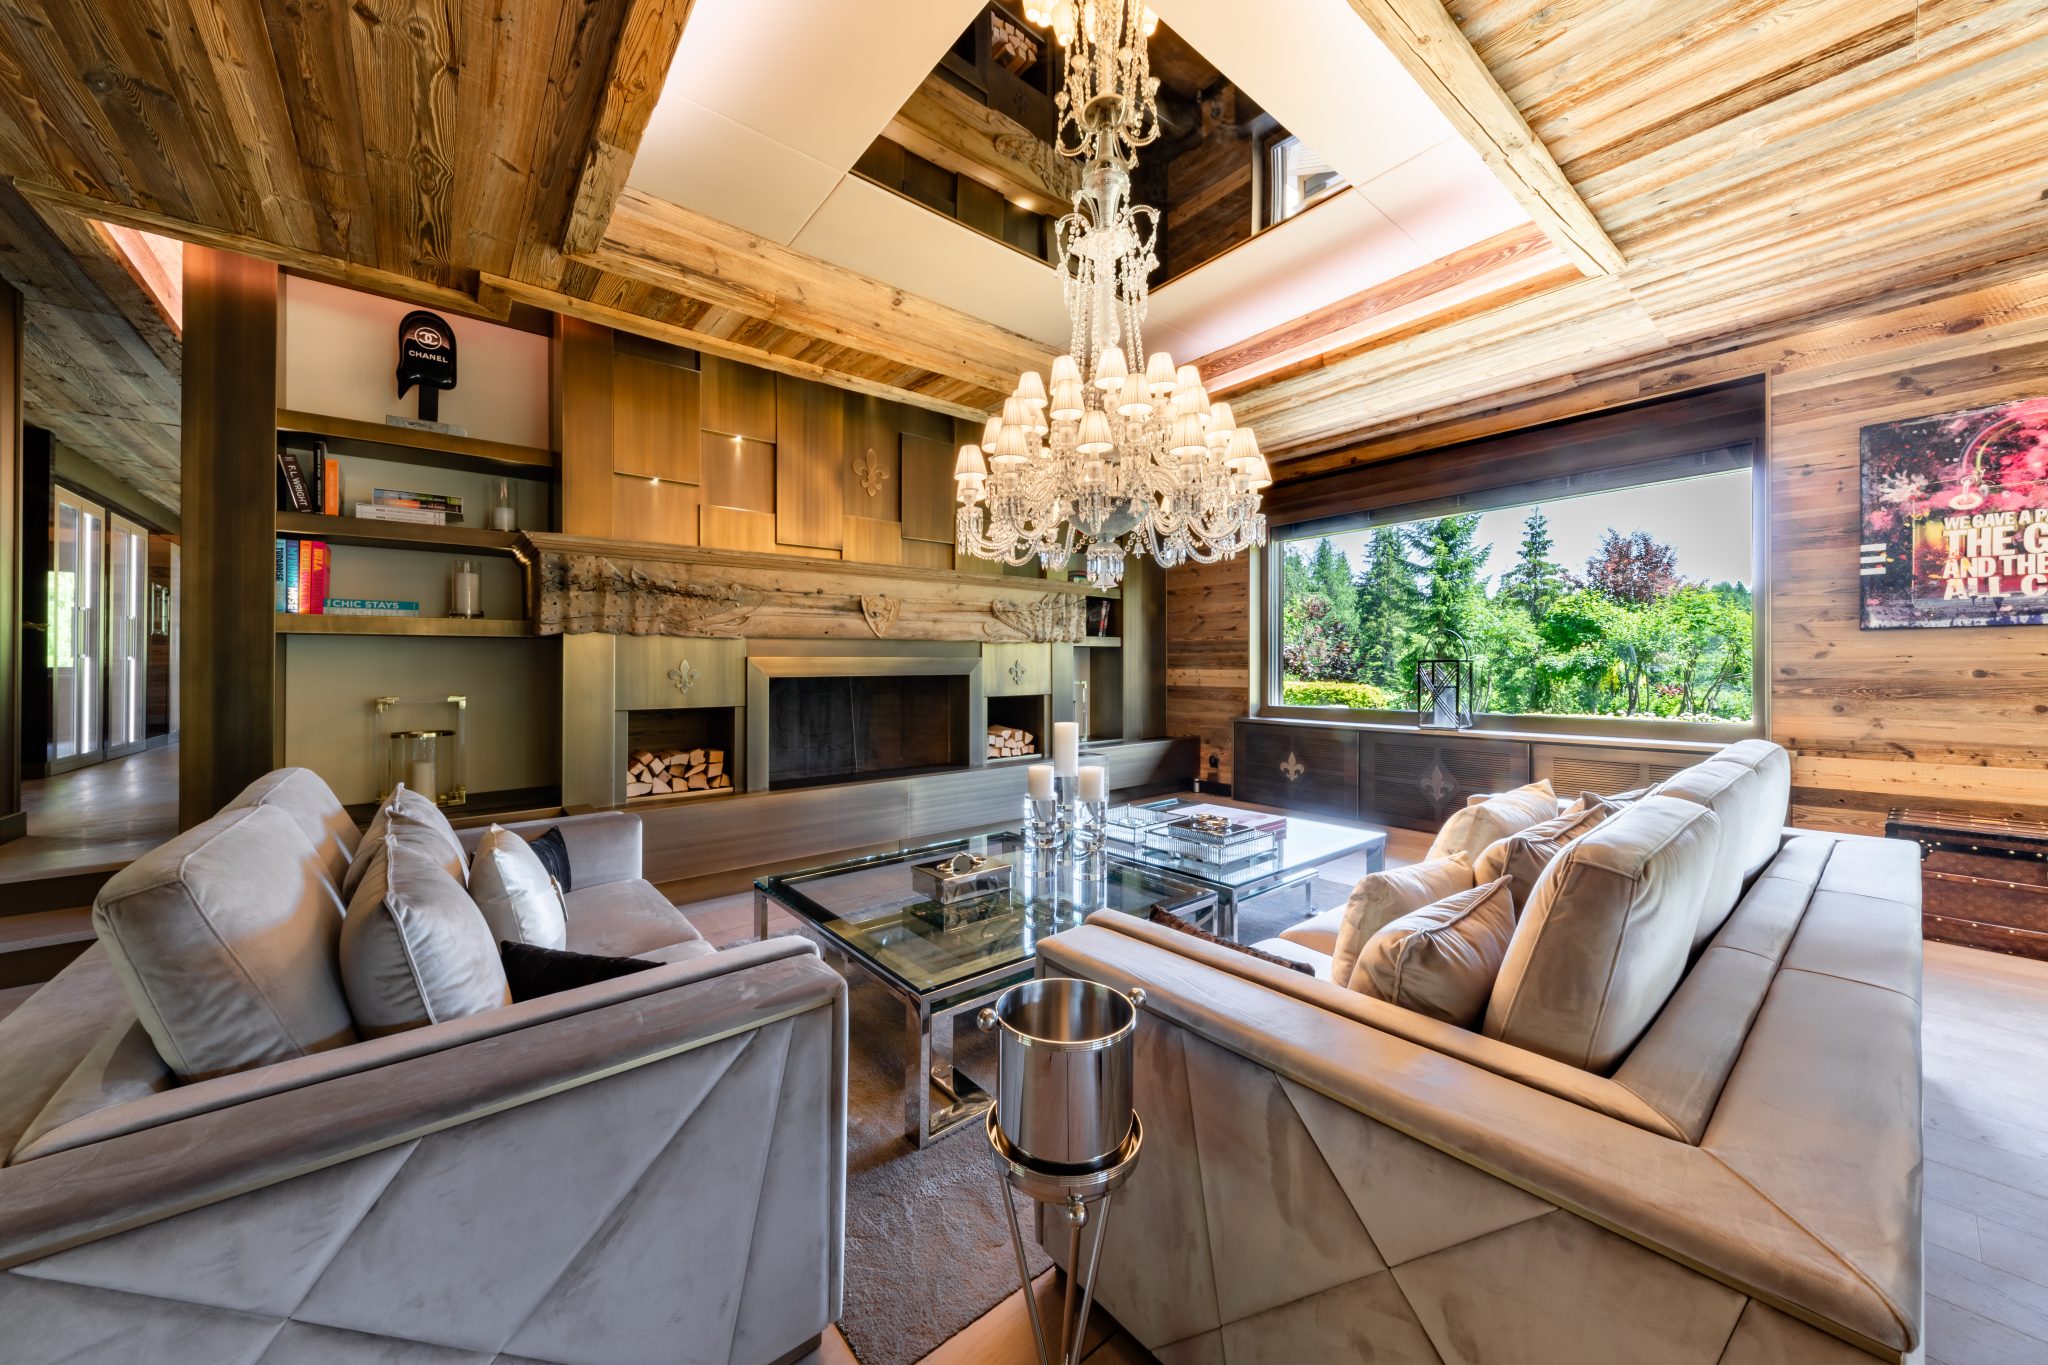 Main Chalet Living Room with Chandelier, Ultima Crans-Montana